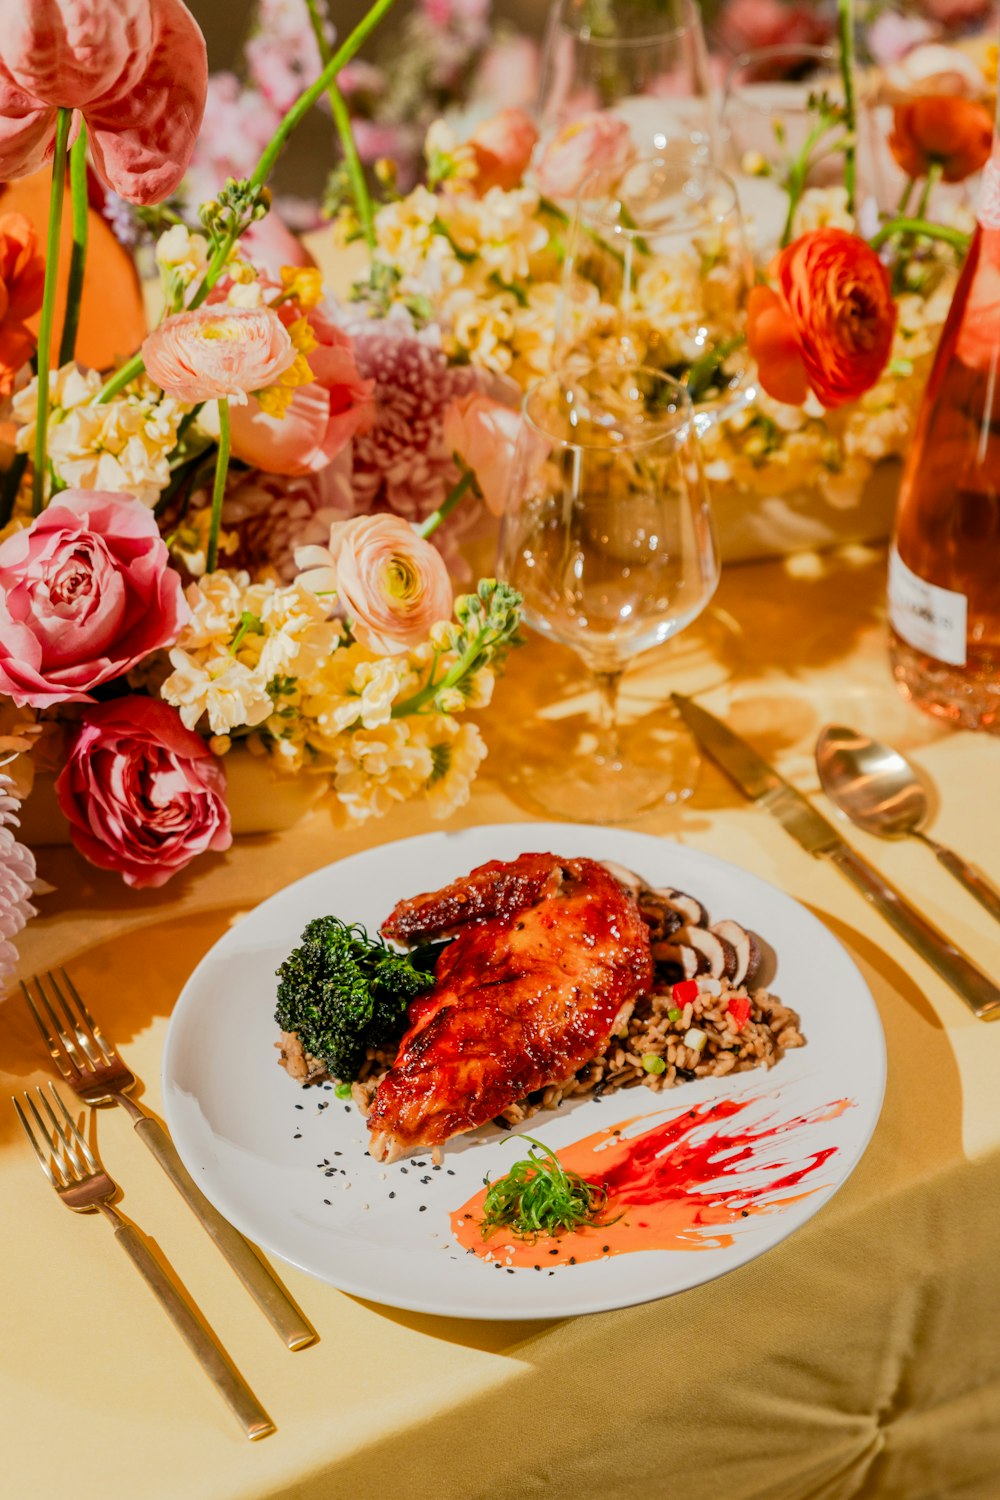 a plate of food on a table with flowers